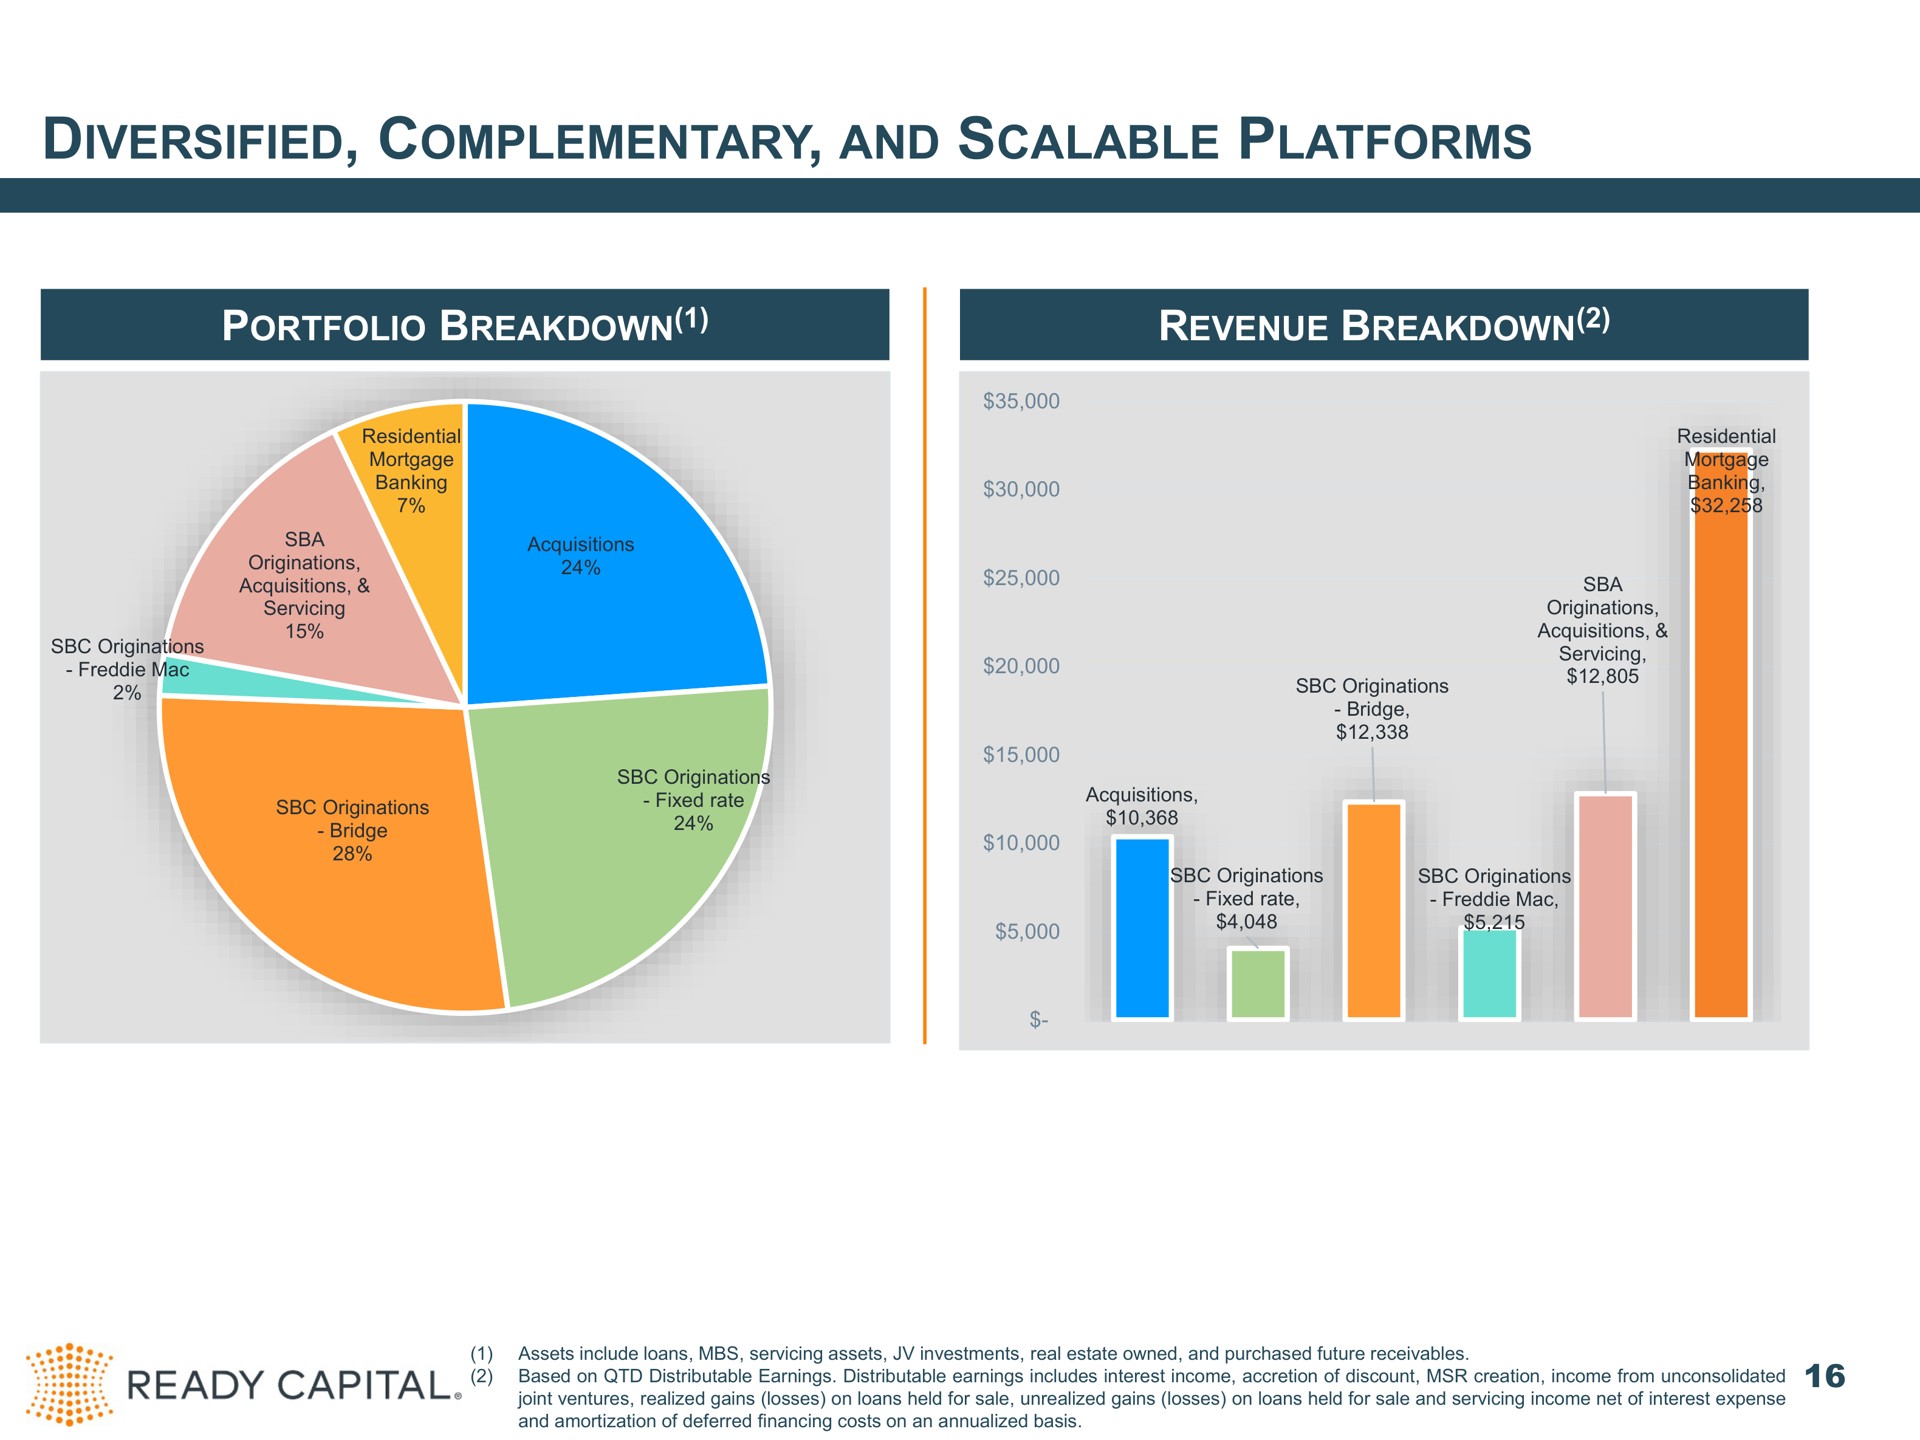 diversified complementary and scalable platforms portfolio breakdown revenue breakdown | Ready Capital